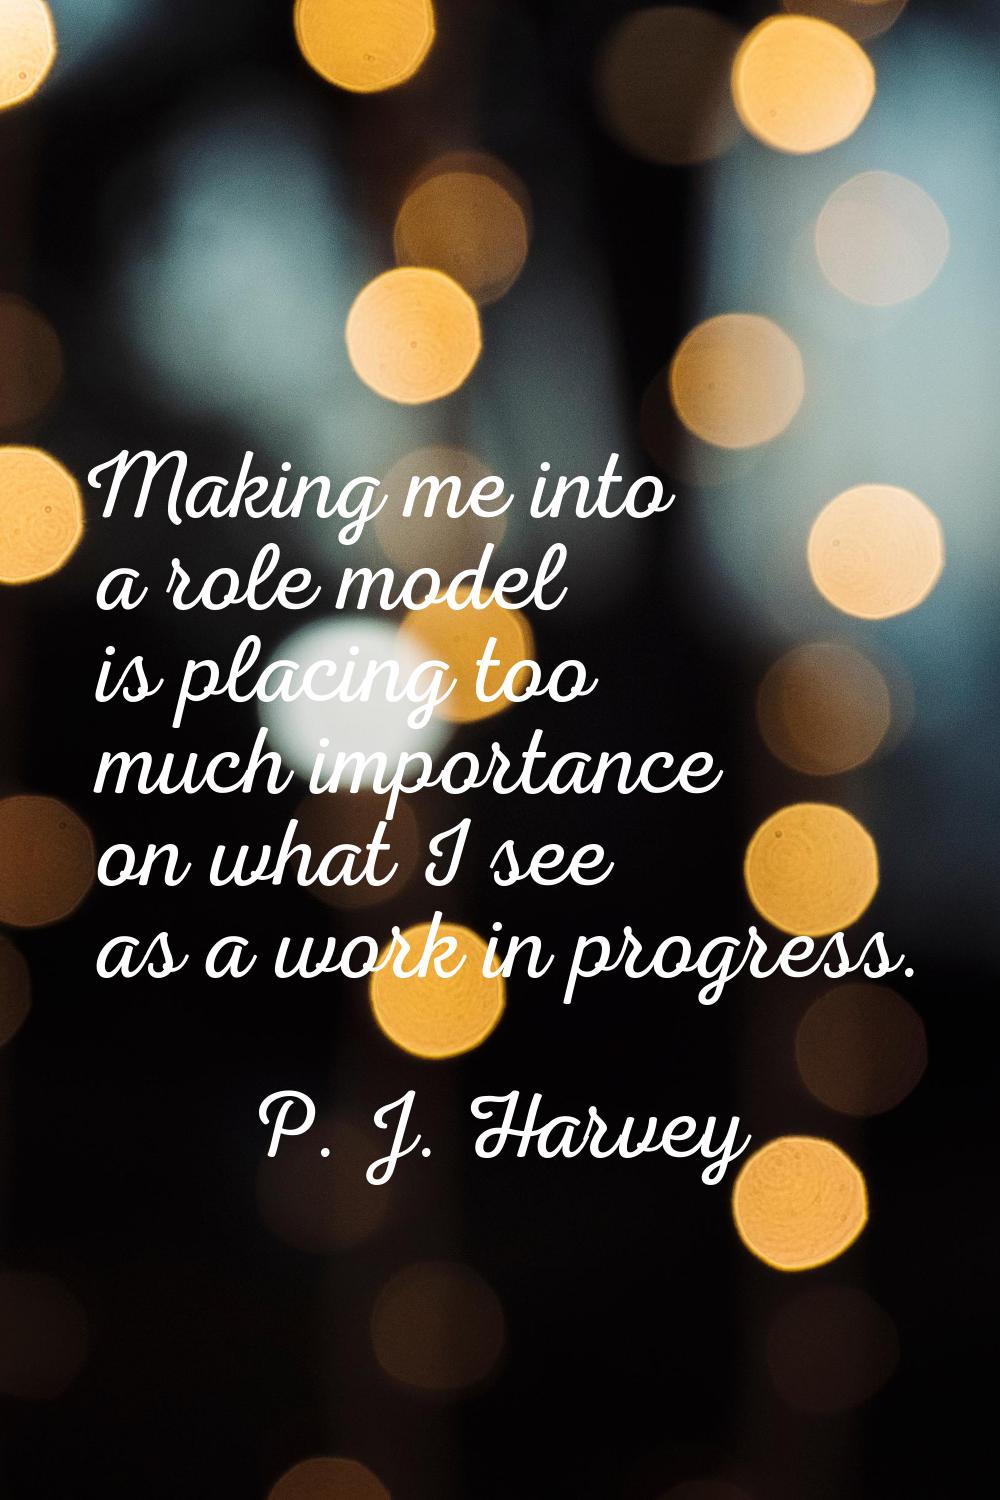 Making me into a role model is placing too much importance on what I see as a work in progress.